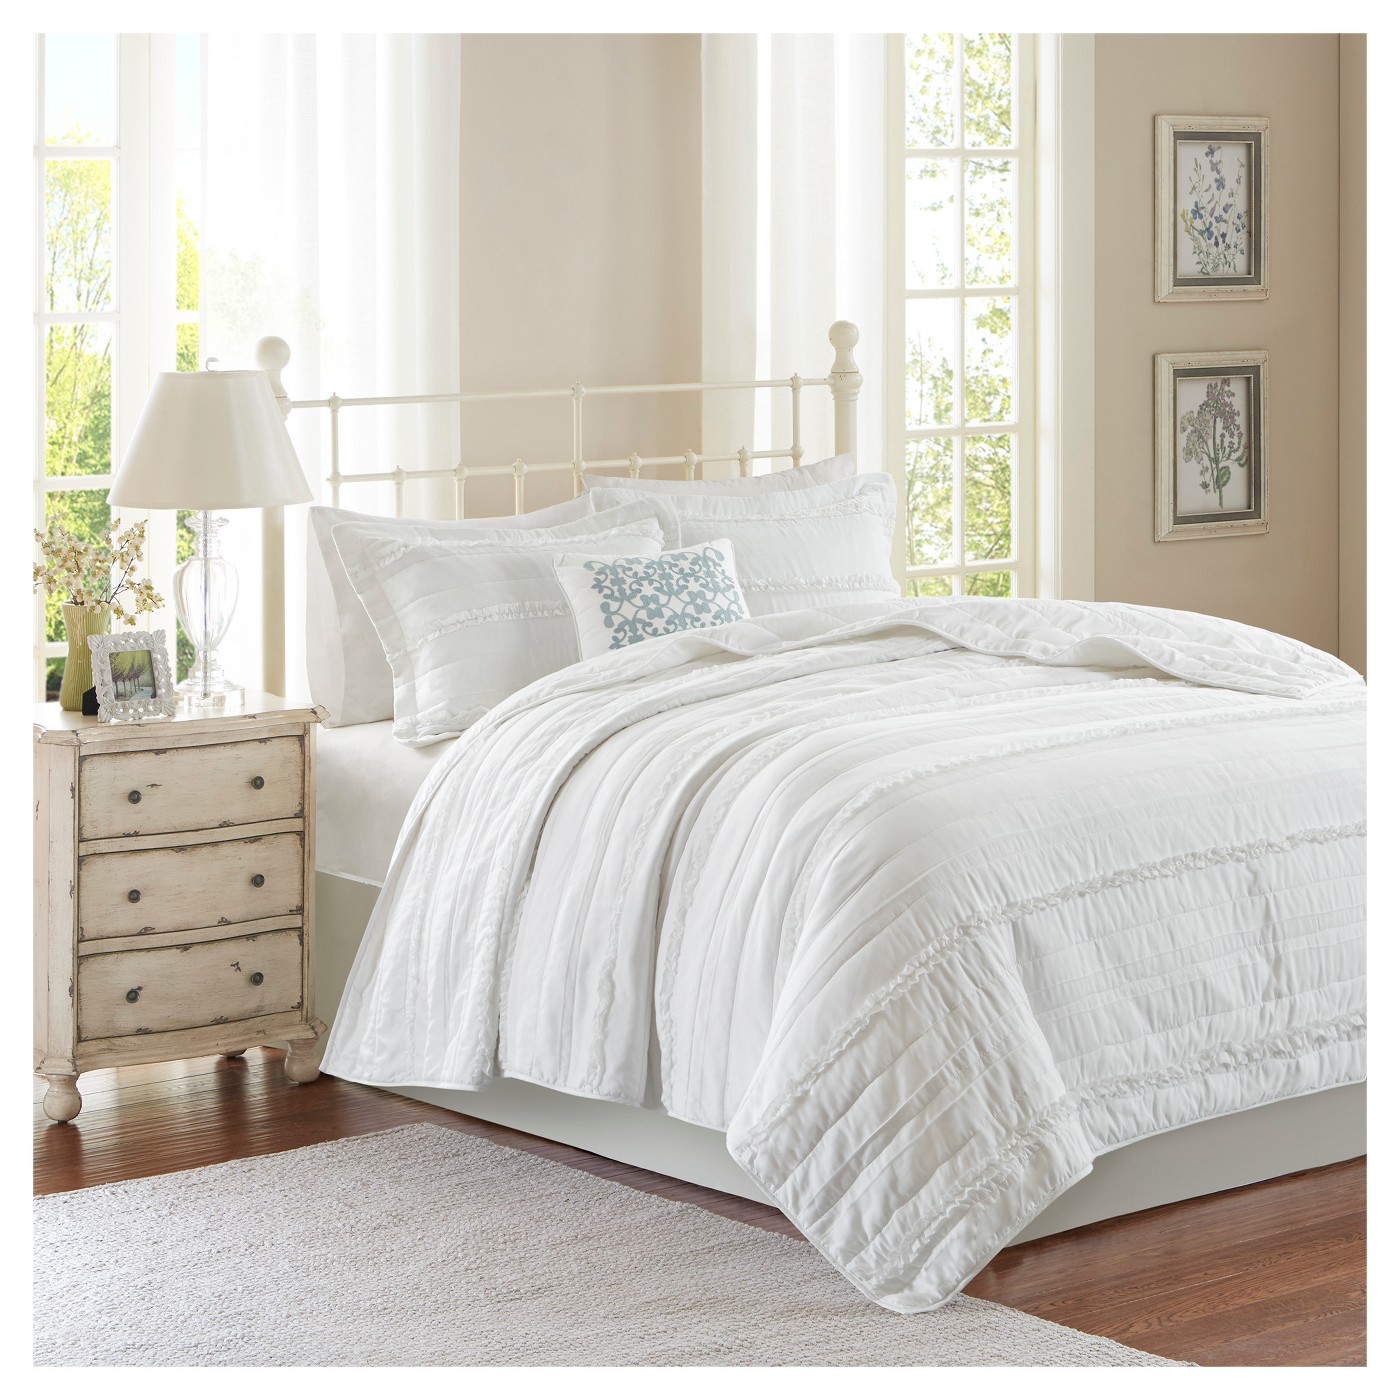 Alexis Ruffle Quilted Coverlet Set - 4pc - image 1 of 3